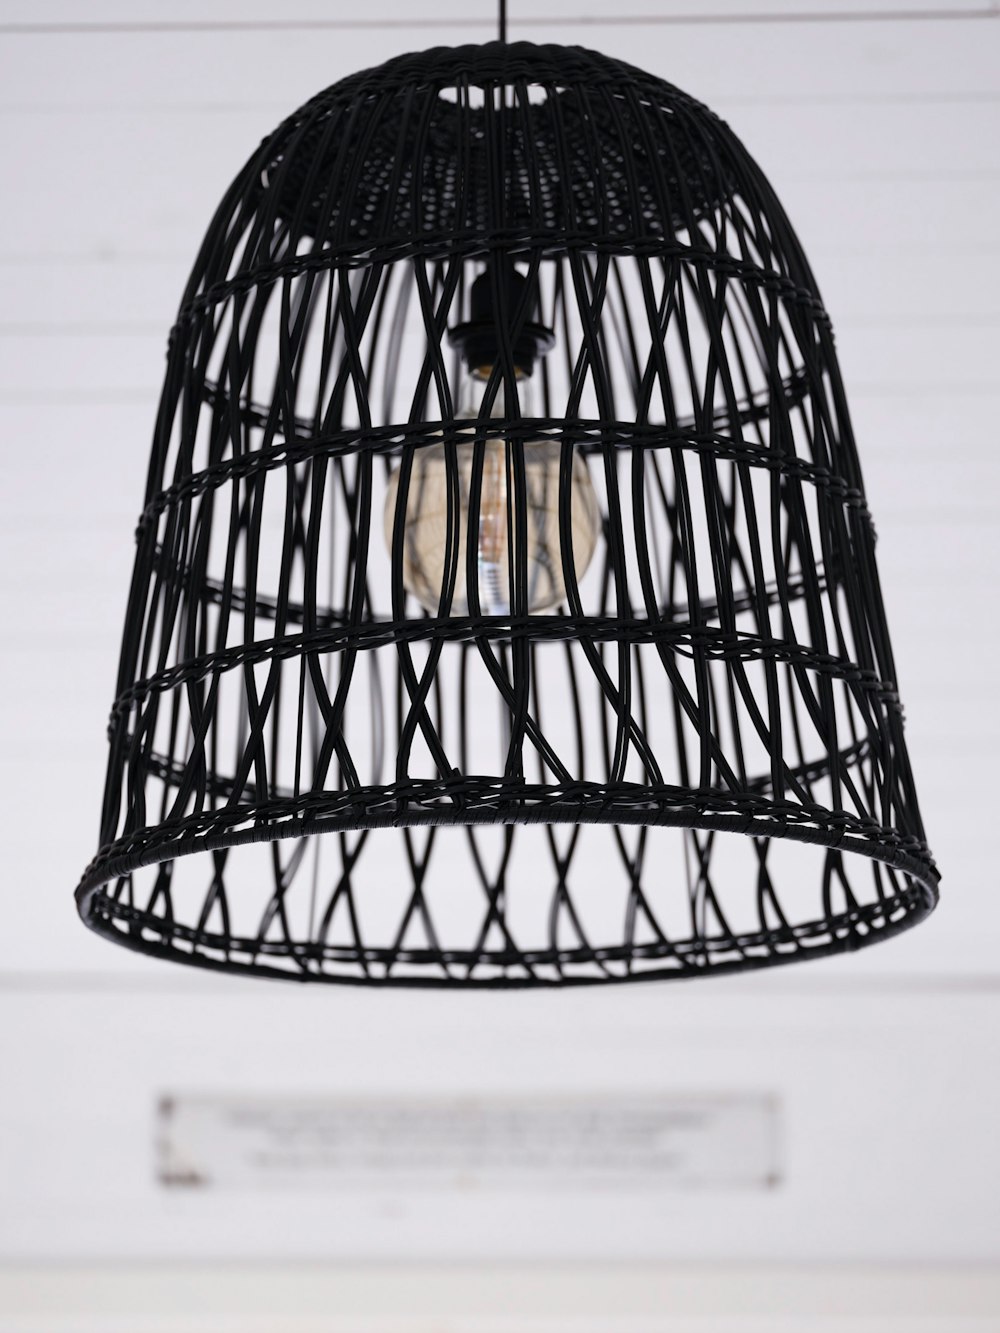 a black bird cage hanging from a ceiling